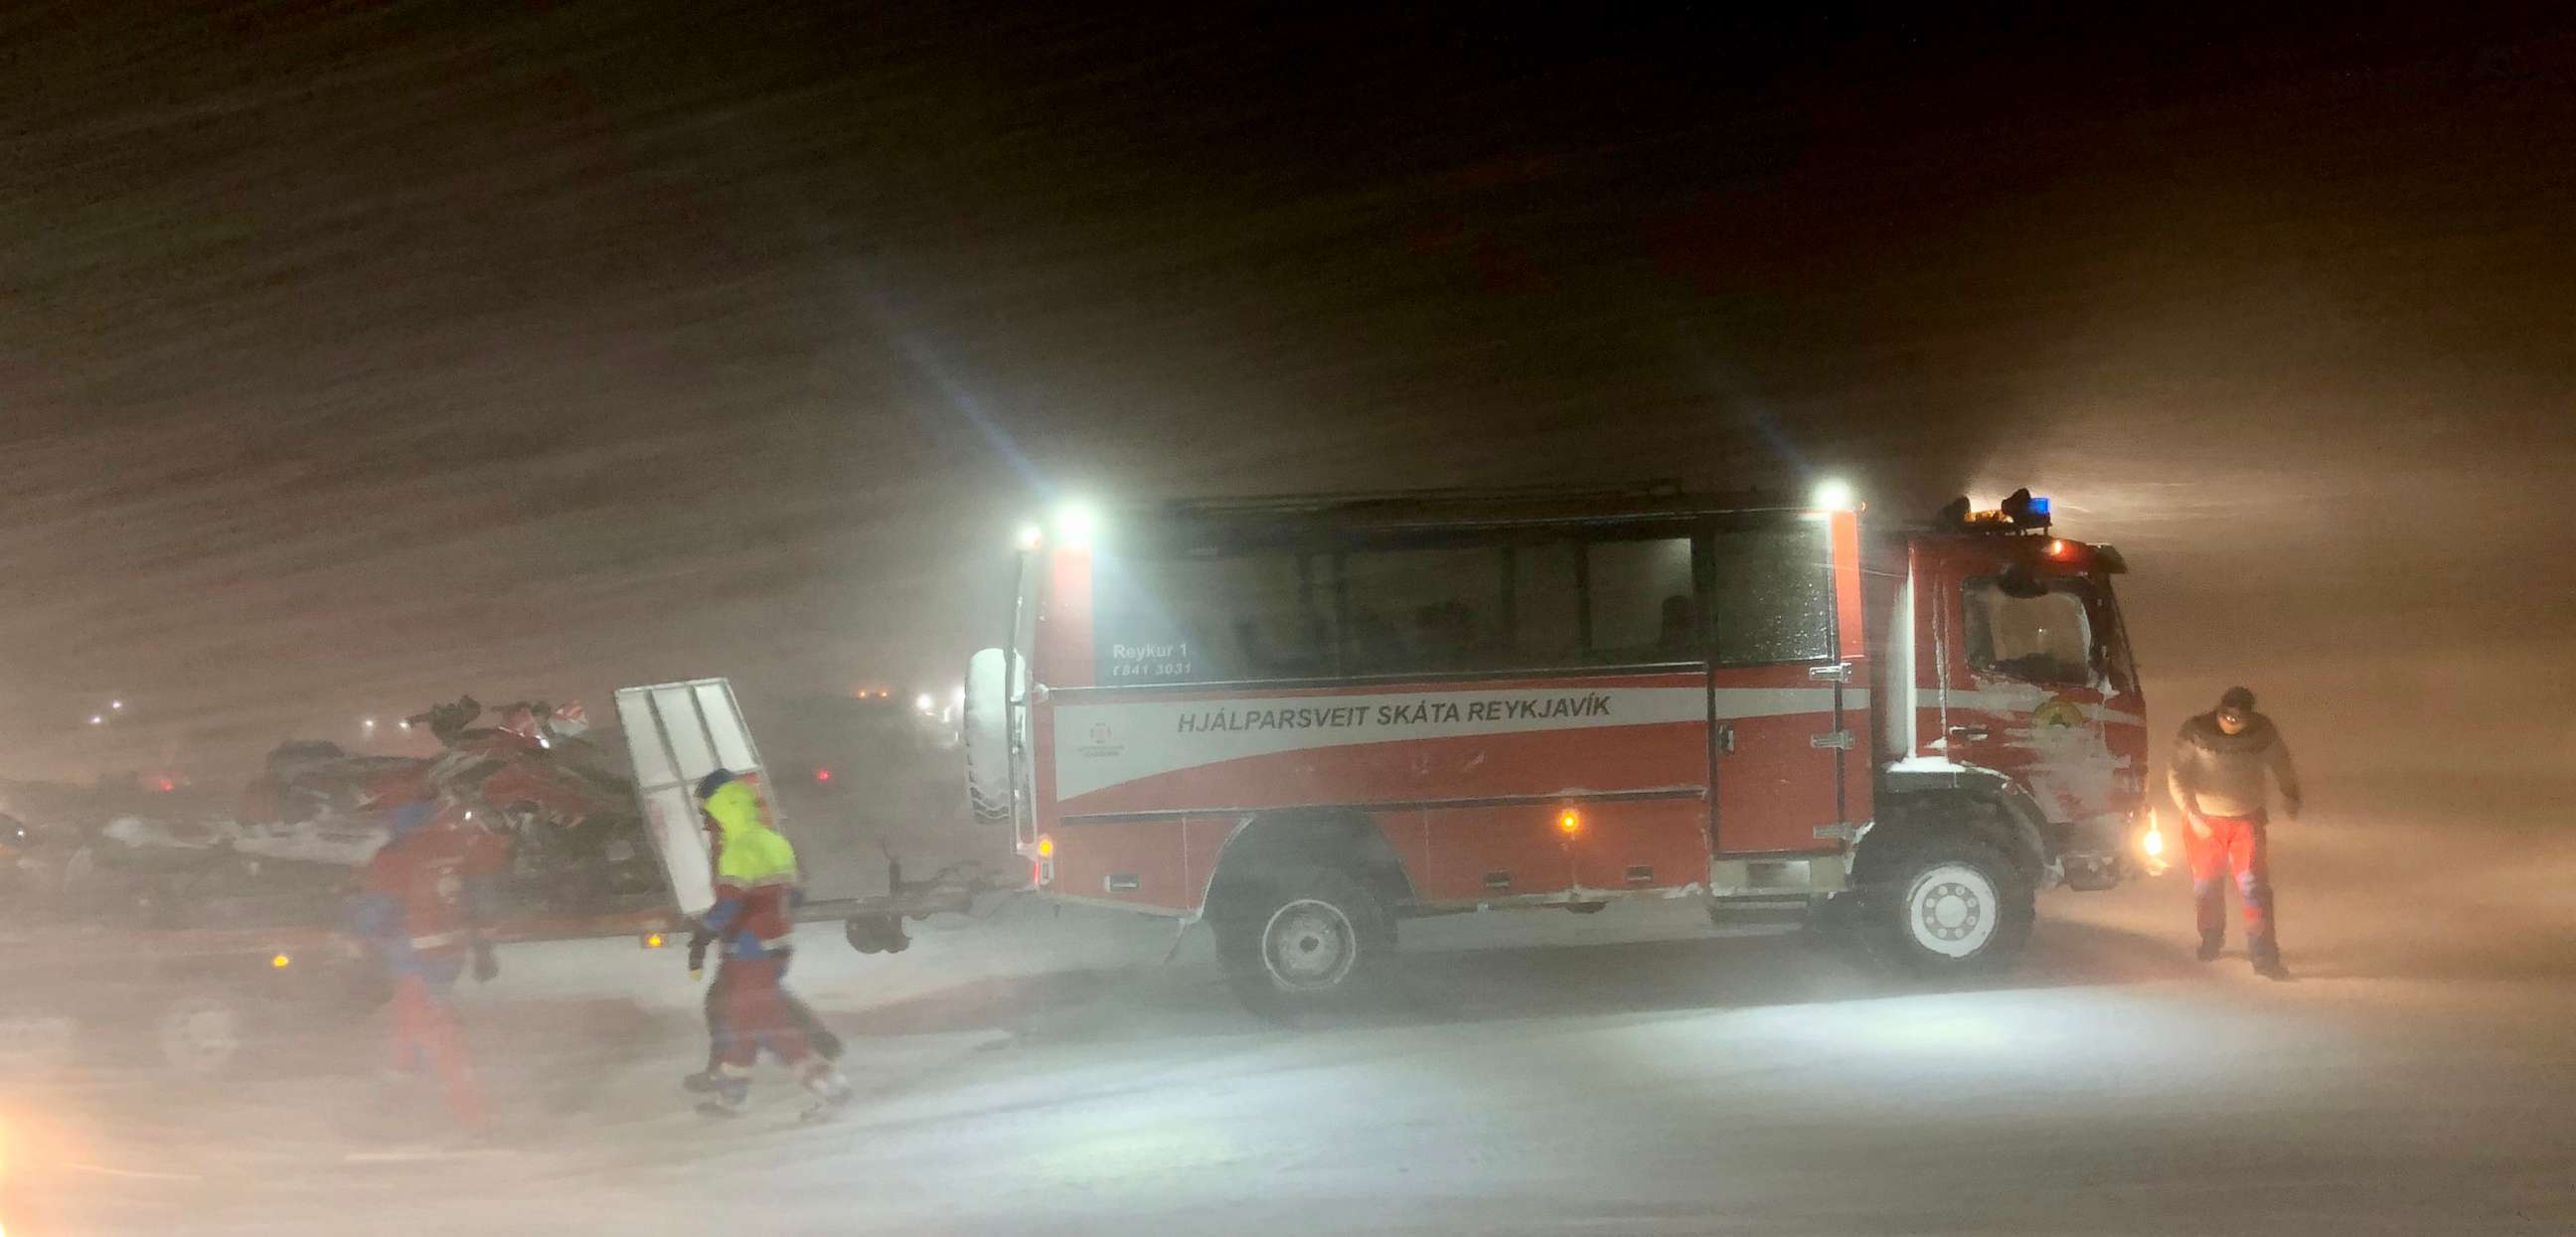 PHOTO: Thirty-two people were rescued from a glacier in Iceland after getting stuck during a blizzard on Jan. 7, 2020.